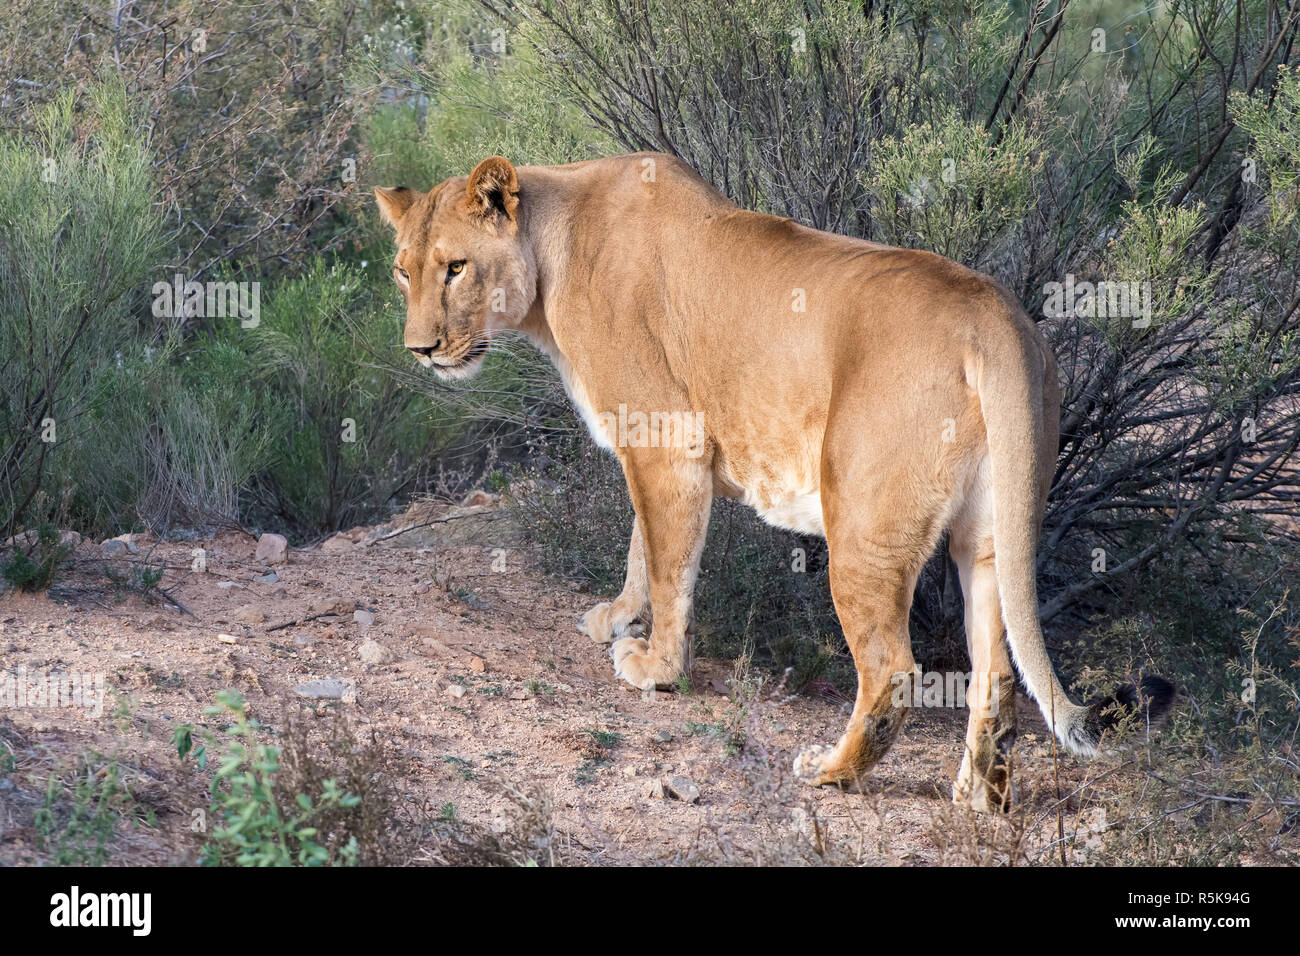 Lioness walking through the Brush, Glancing over Shoulder Stock Photo